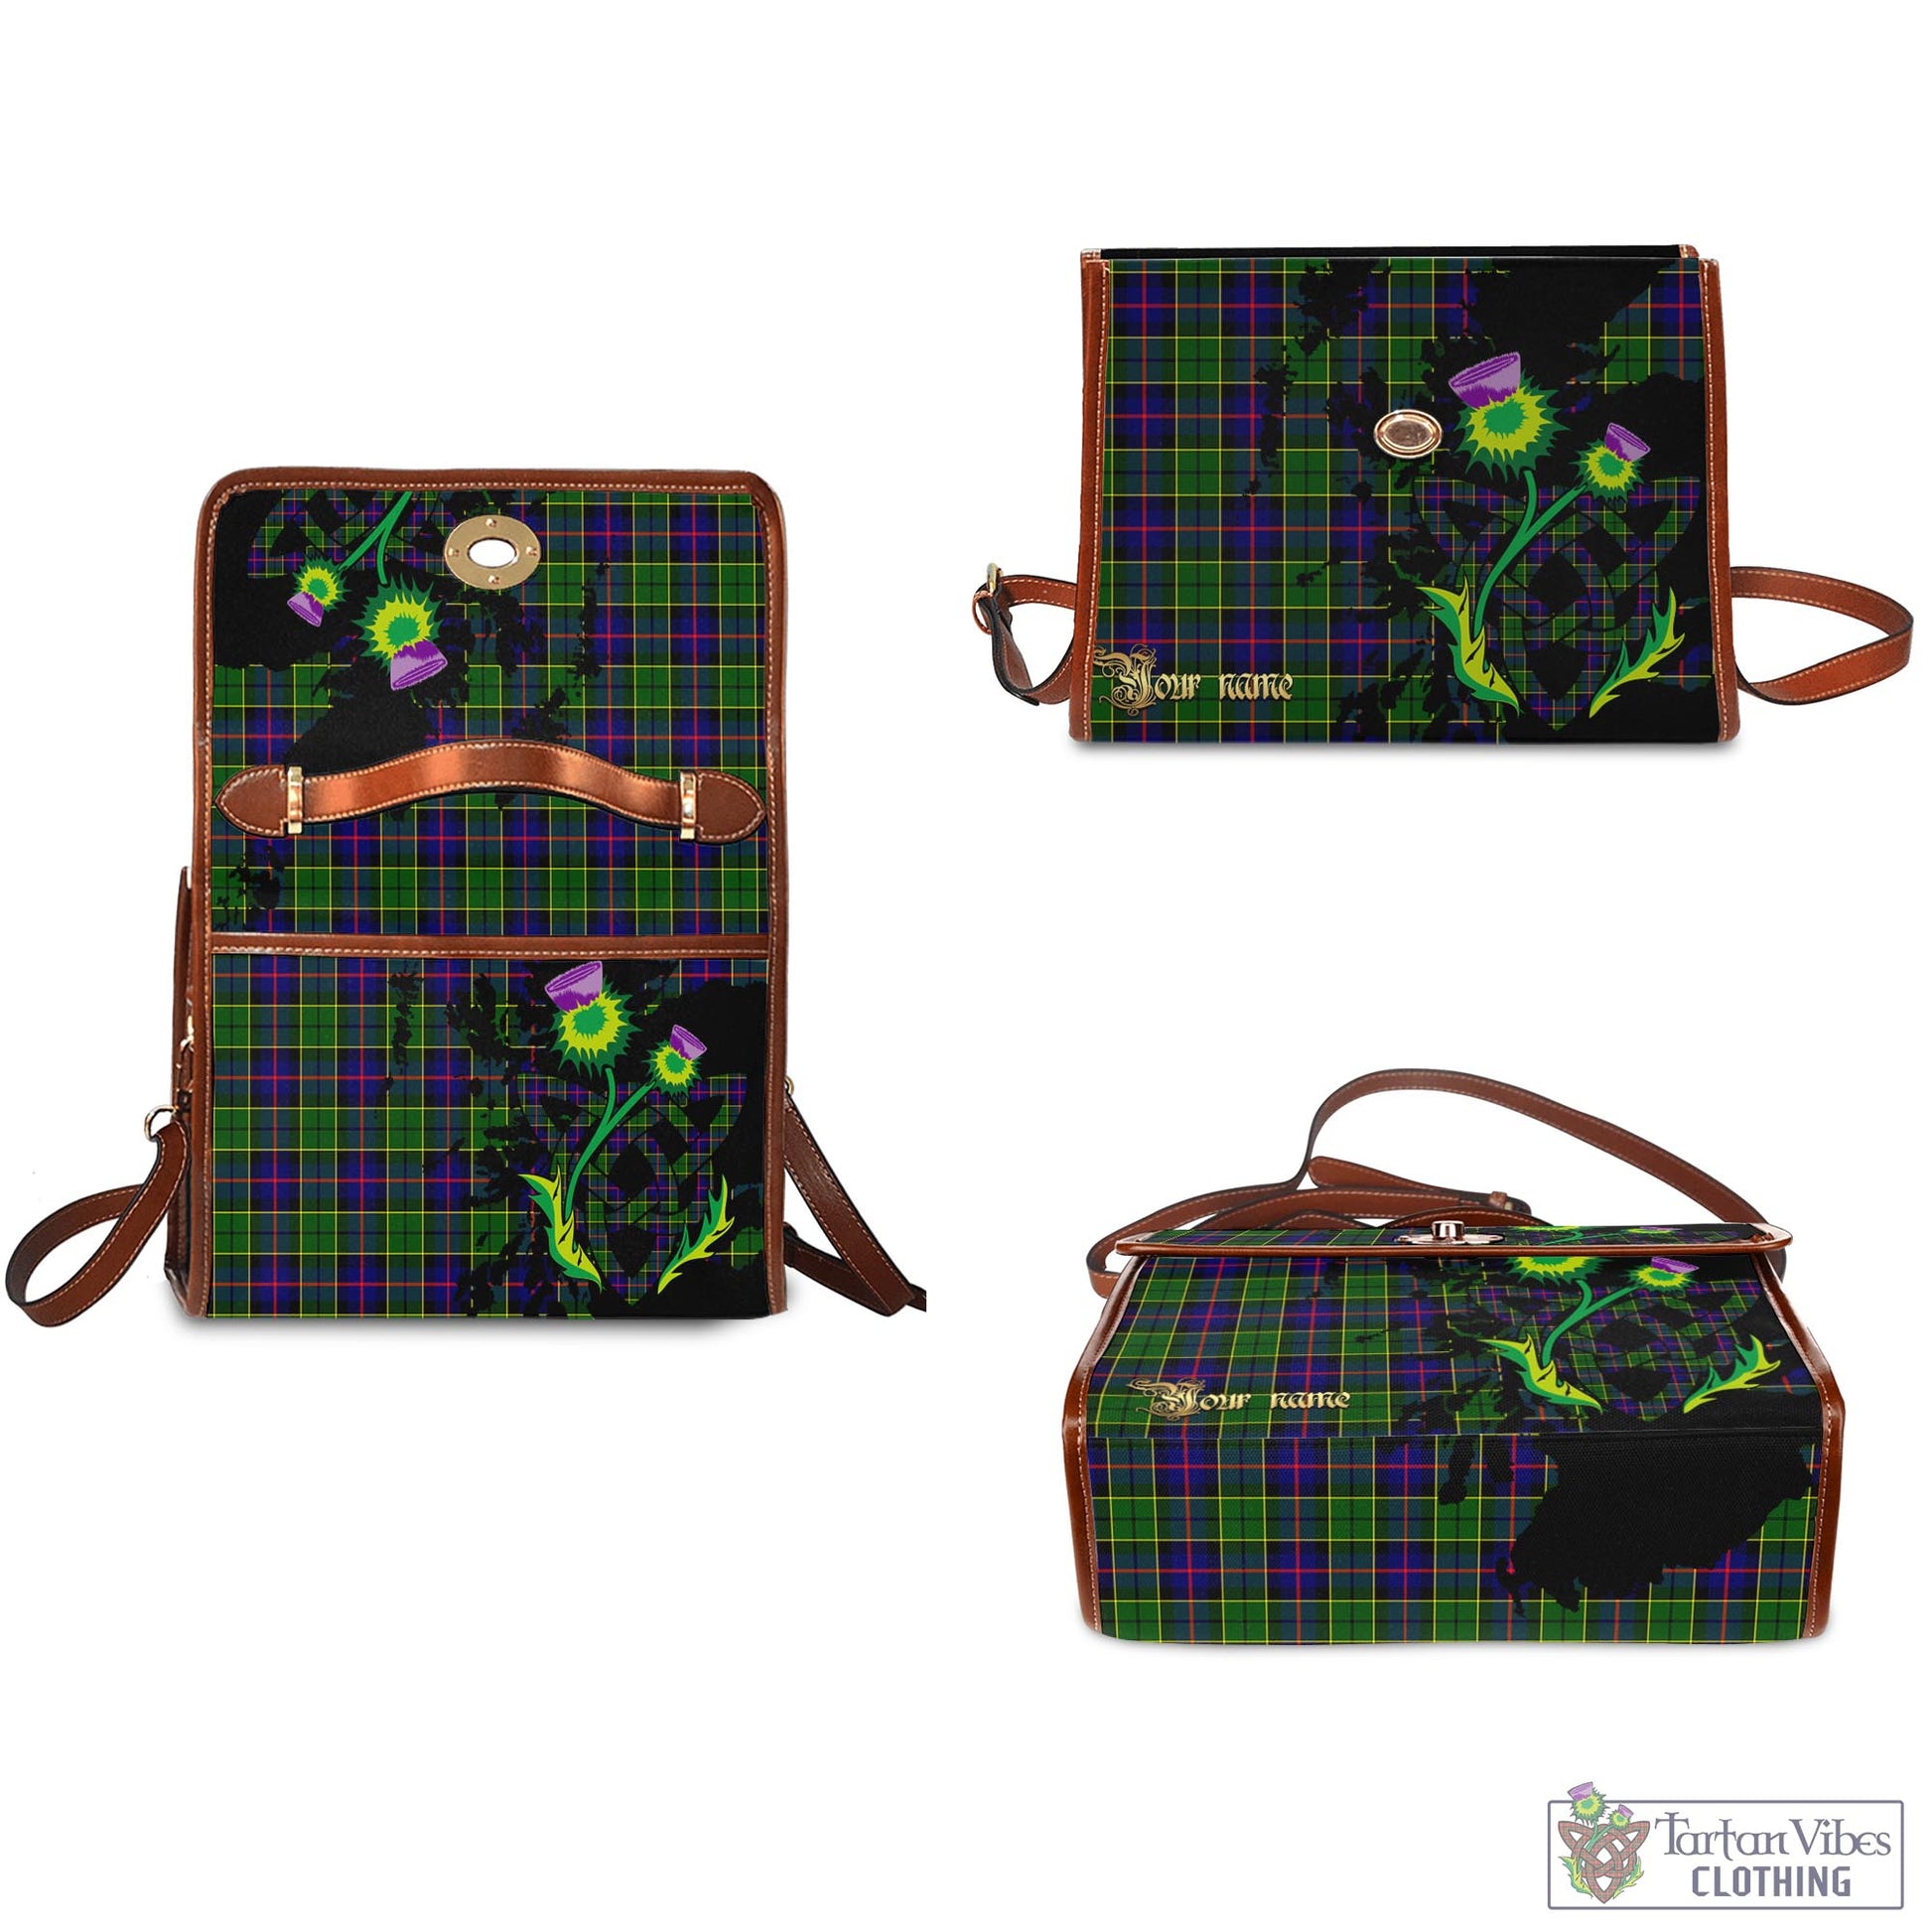 Tartan Vibes Clothing Forsyth Modern Tartan Waterproof Canvas Bag with Scotland Map and Thistle Celtic Accents